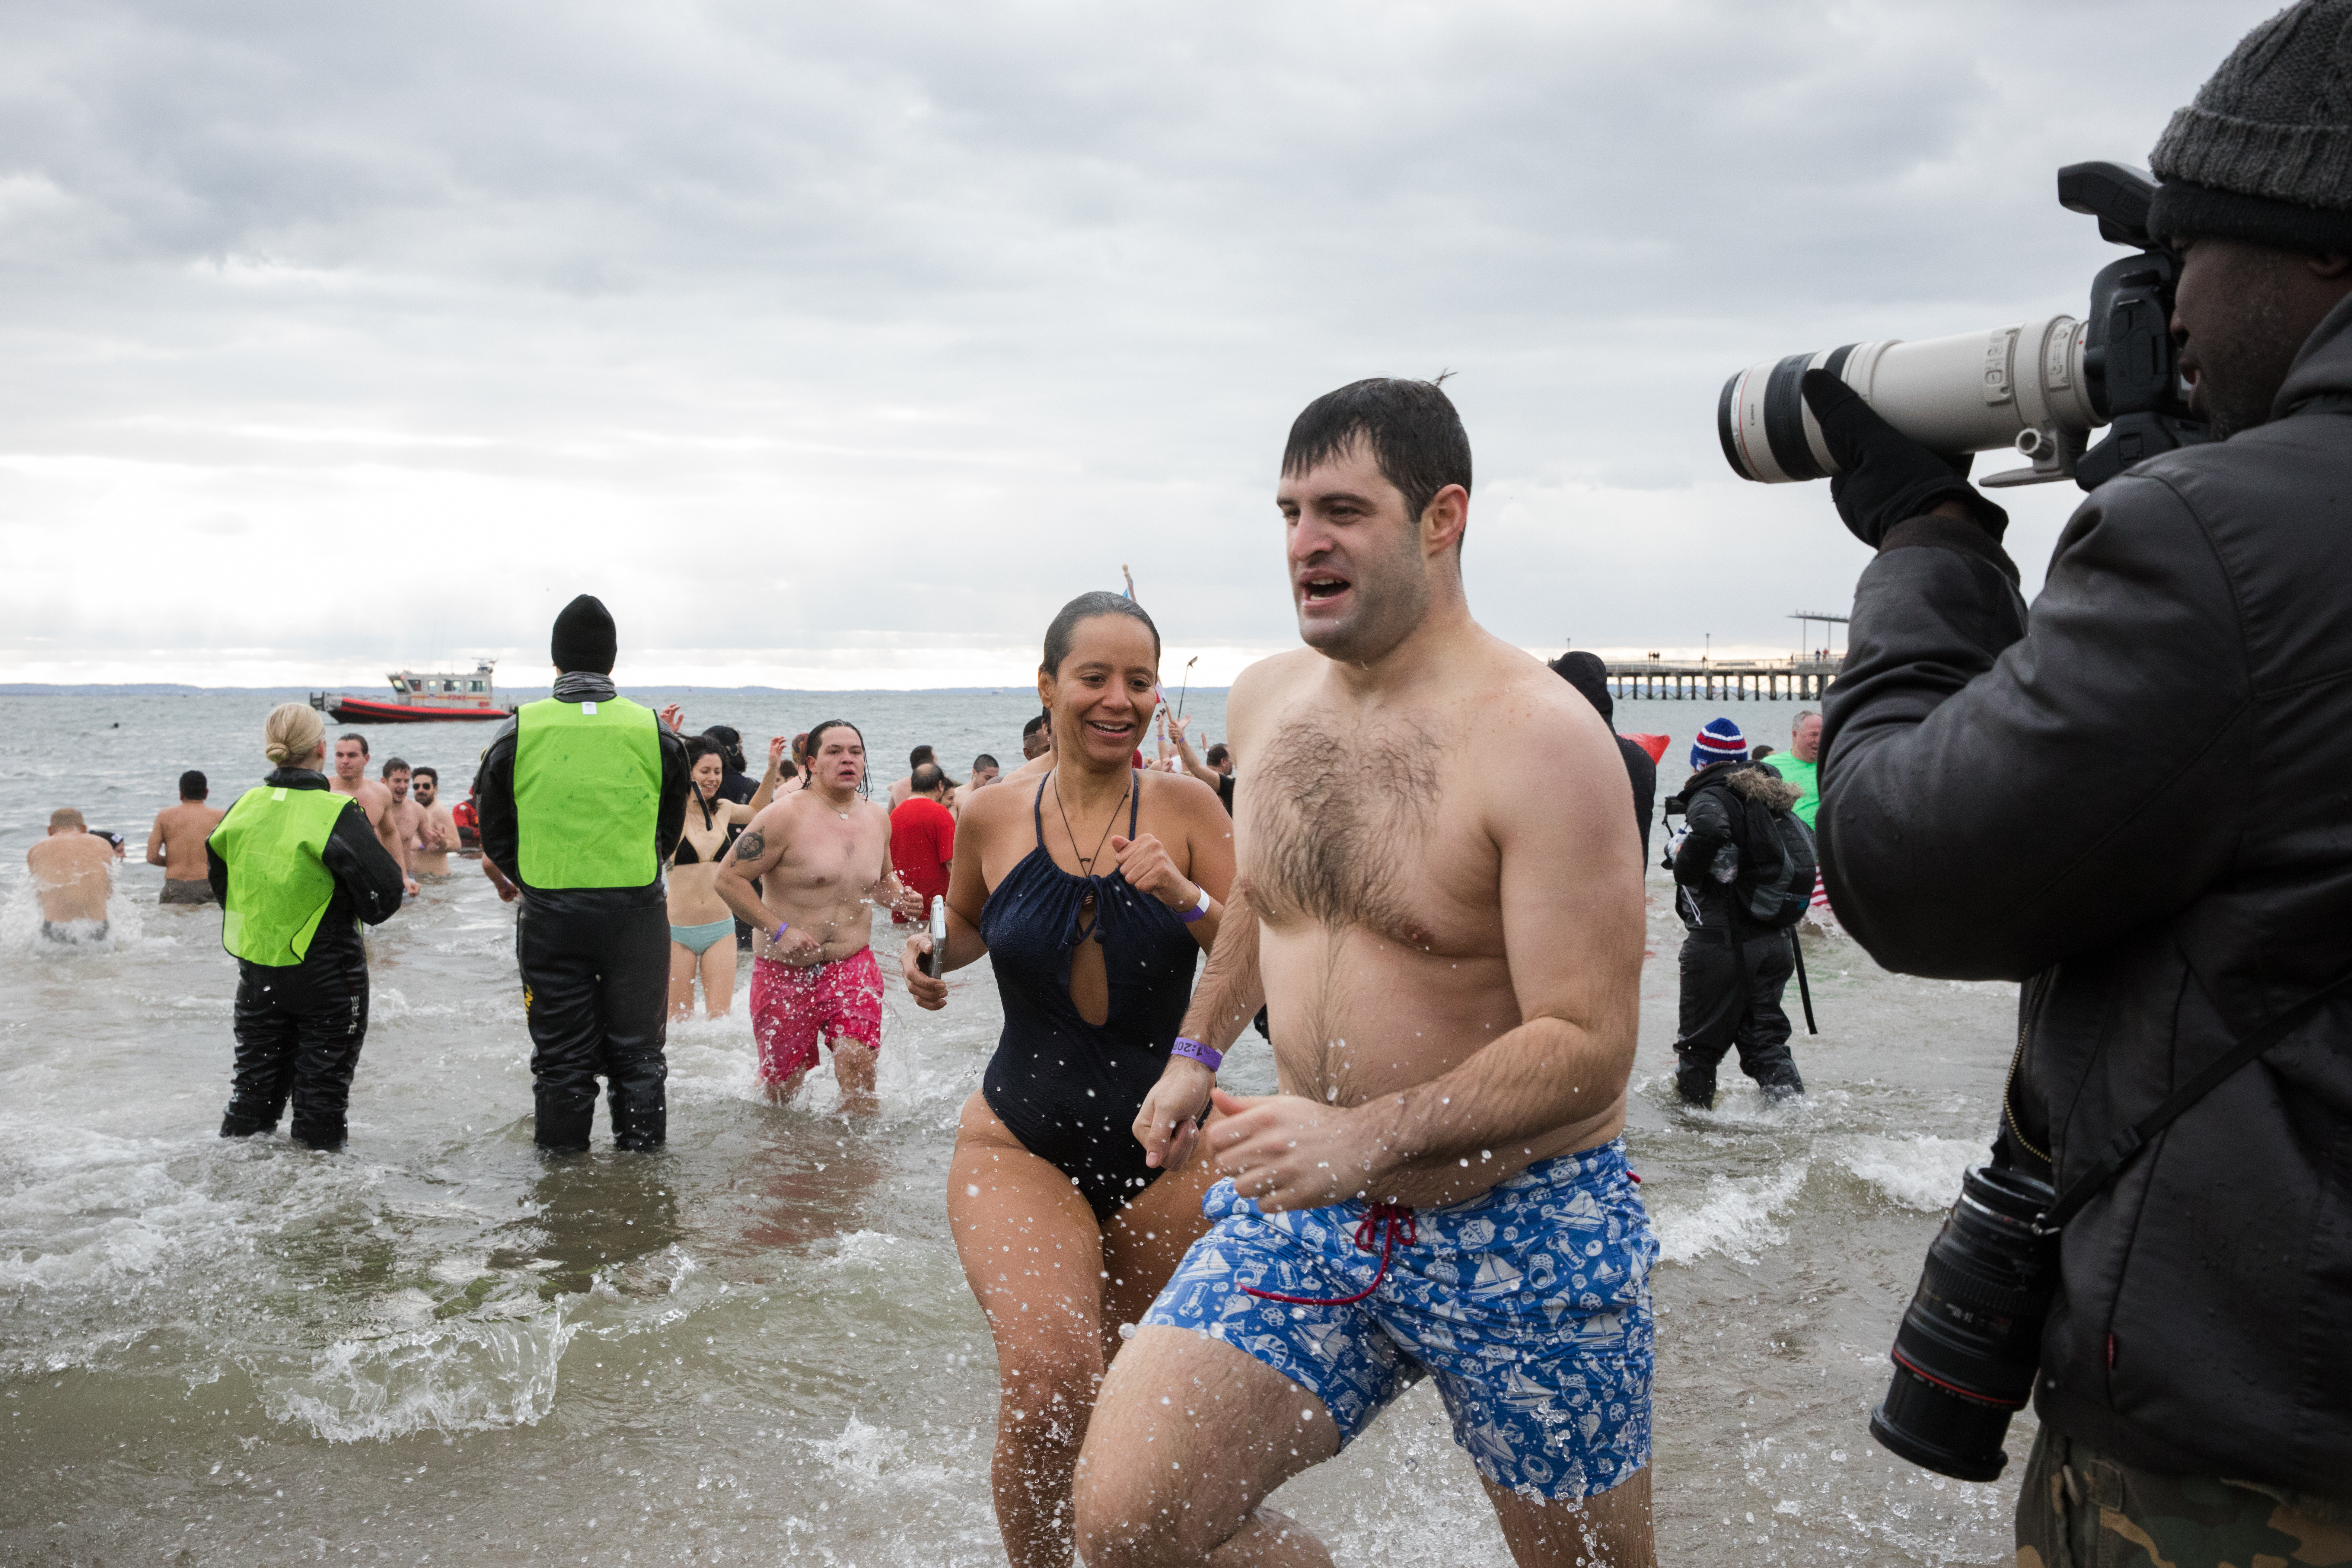 The Polar Plunge attracts hordes of photographers, some brave enough to get into the chilly ocean alongside the swimmers.